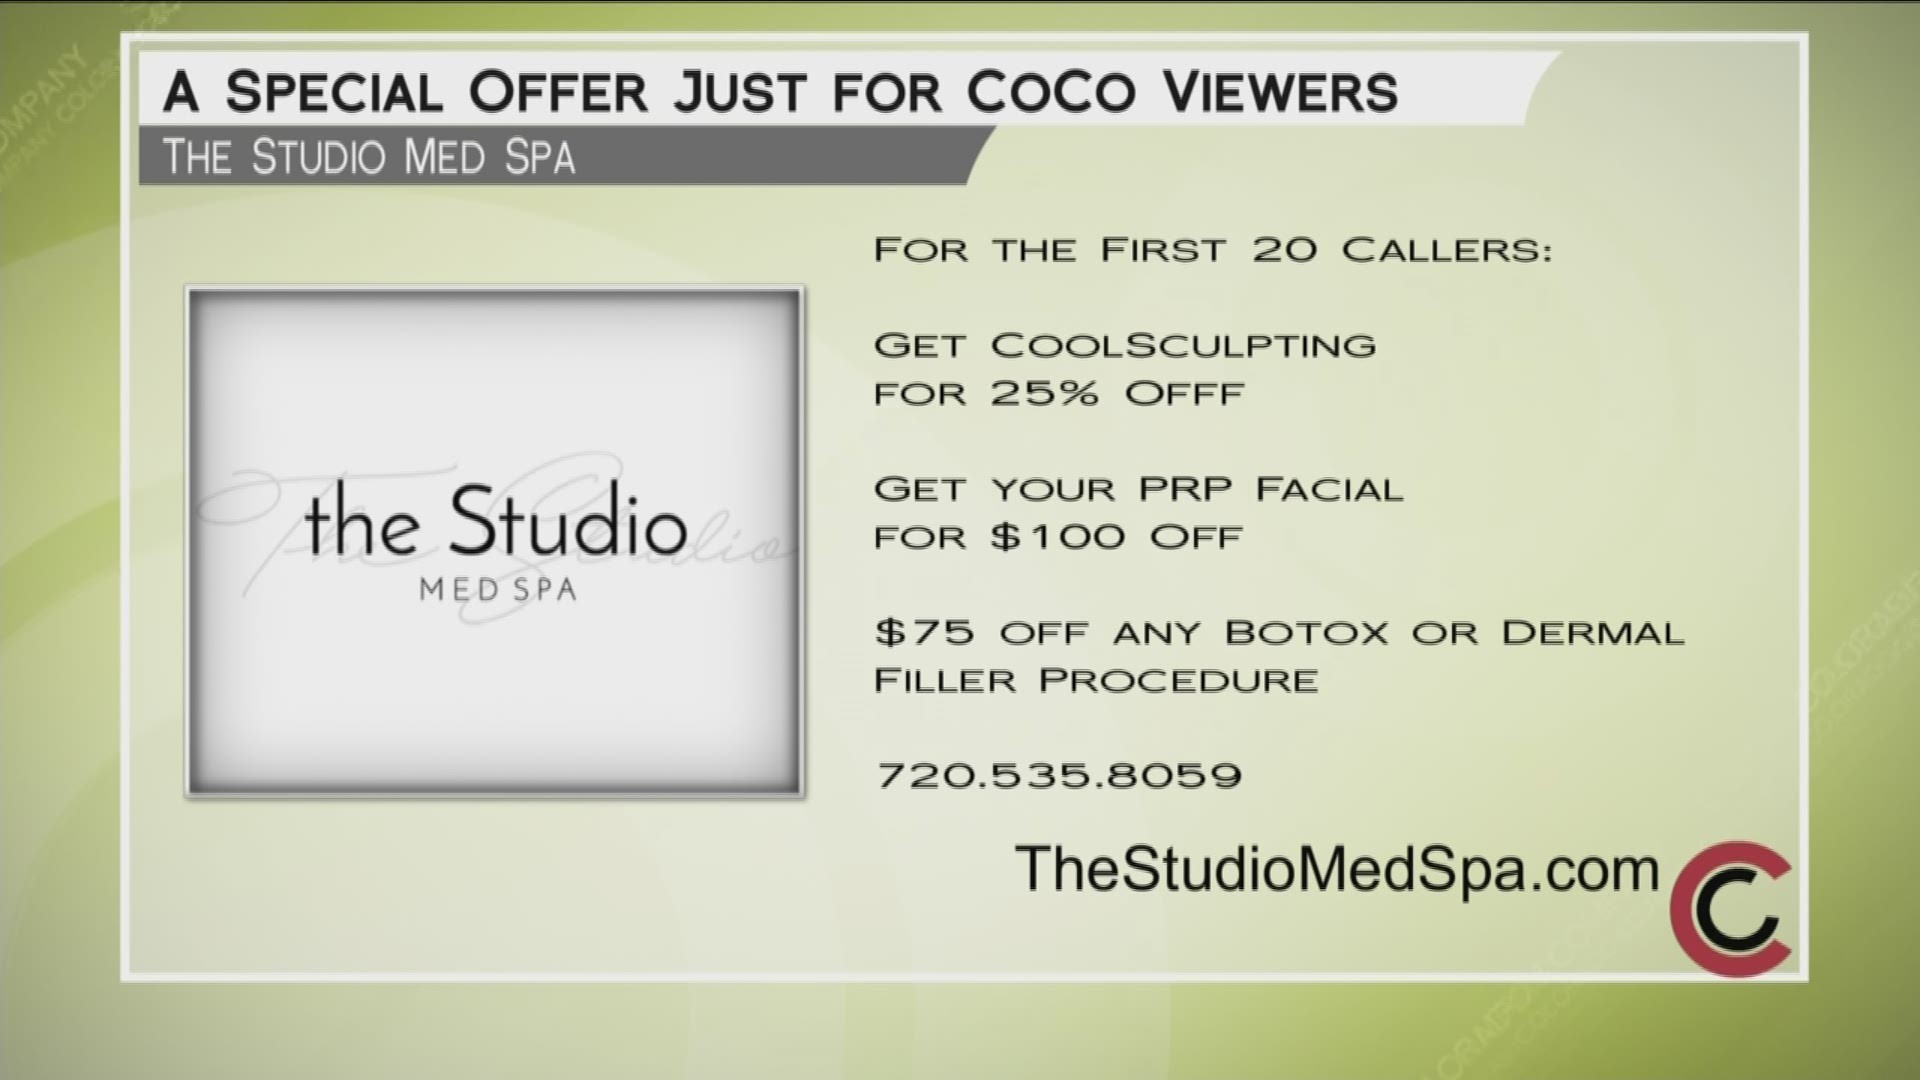 Give The Studio Med Spa a call at 720.535.8059 and find out about today's specials, like 25% off Coolsculpting! Learn more at TheStudioMedSpa.com.